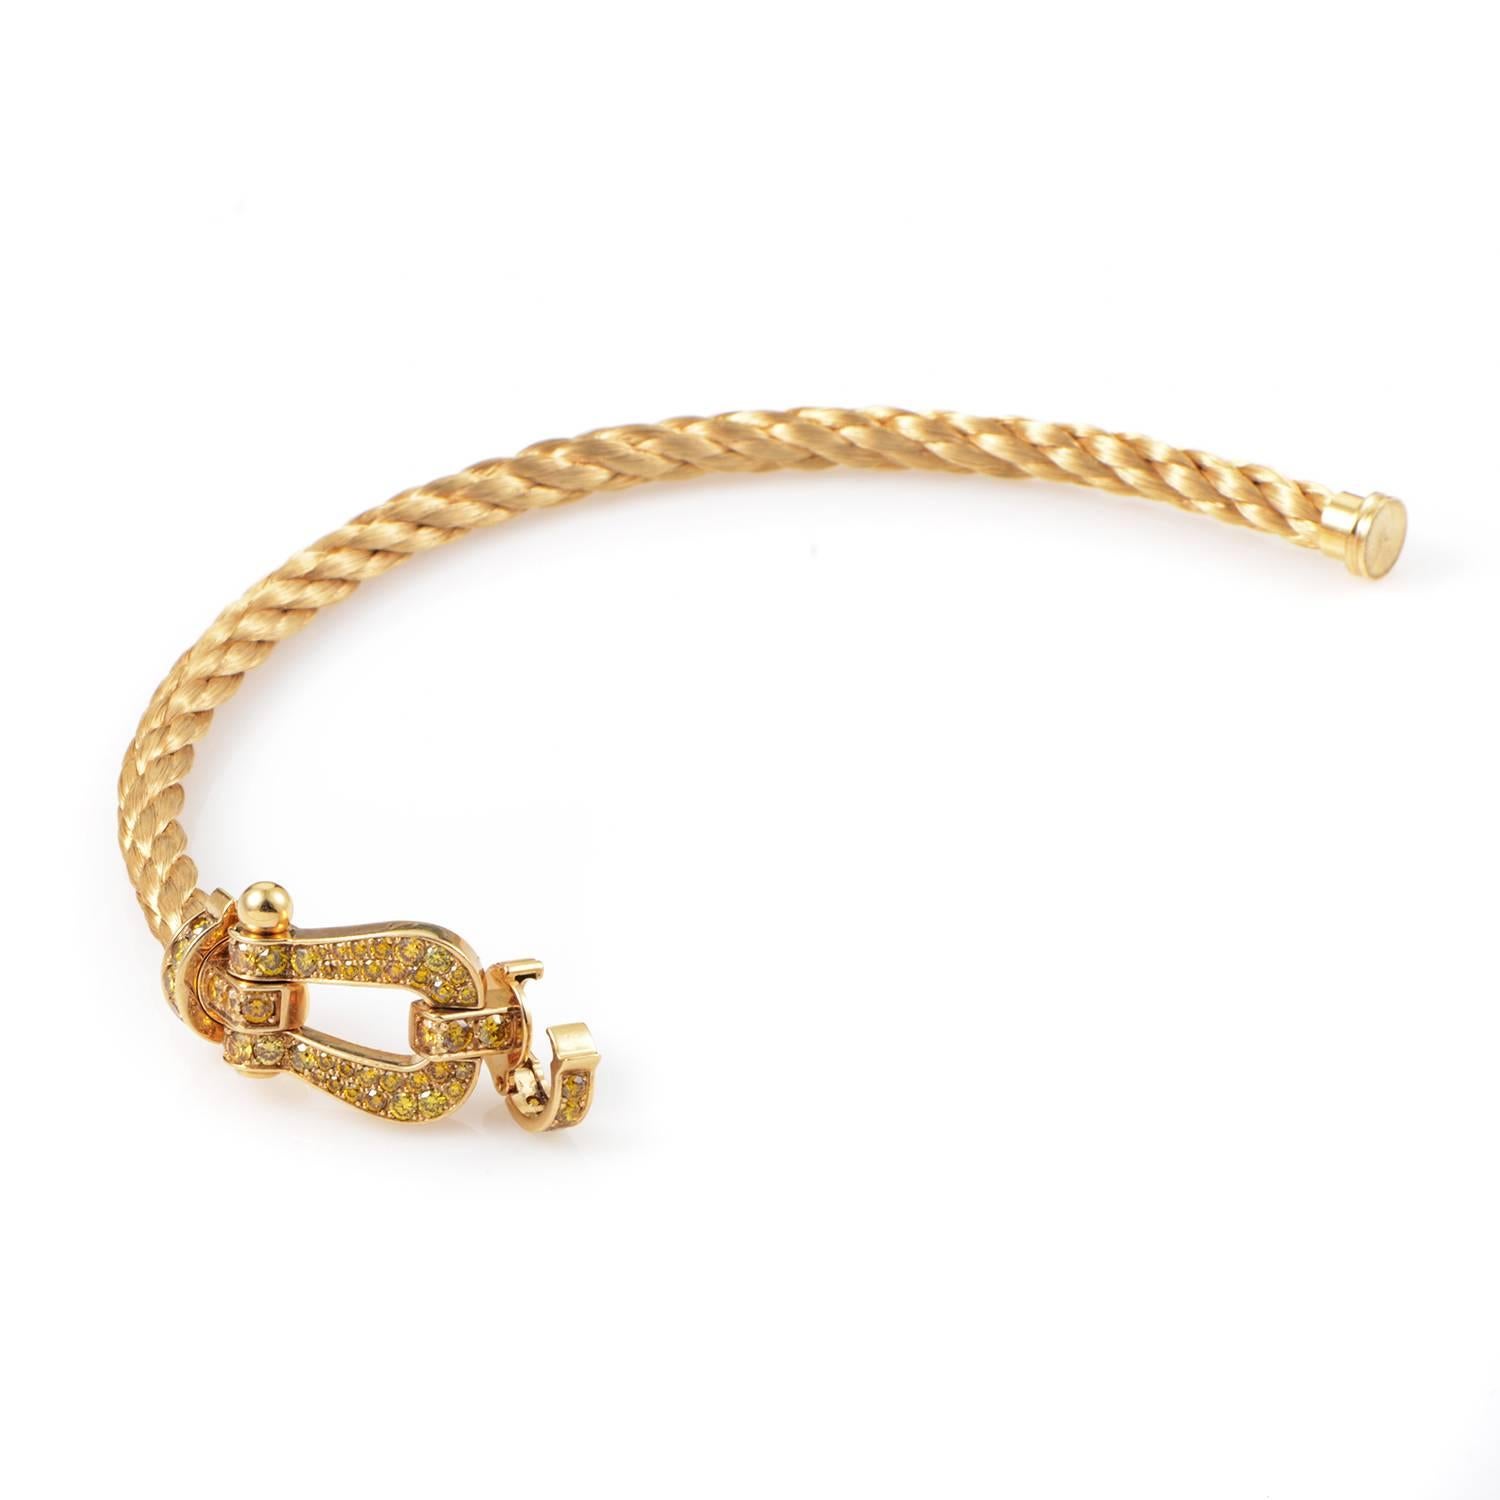 Braided to create a fabulous texture and scintillating play of light, this stunning bracelet from Fred of Paris boasts a charming horseshoe motif next to its clasp, with 1.60 carats of gorgeous vivid yellow diamonds gracing the warm surface of 18K